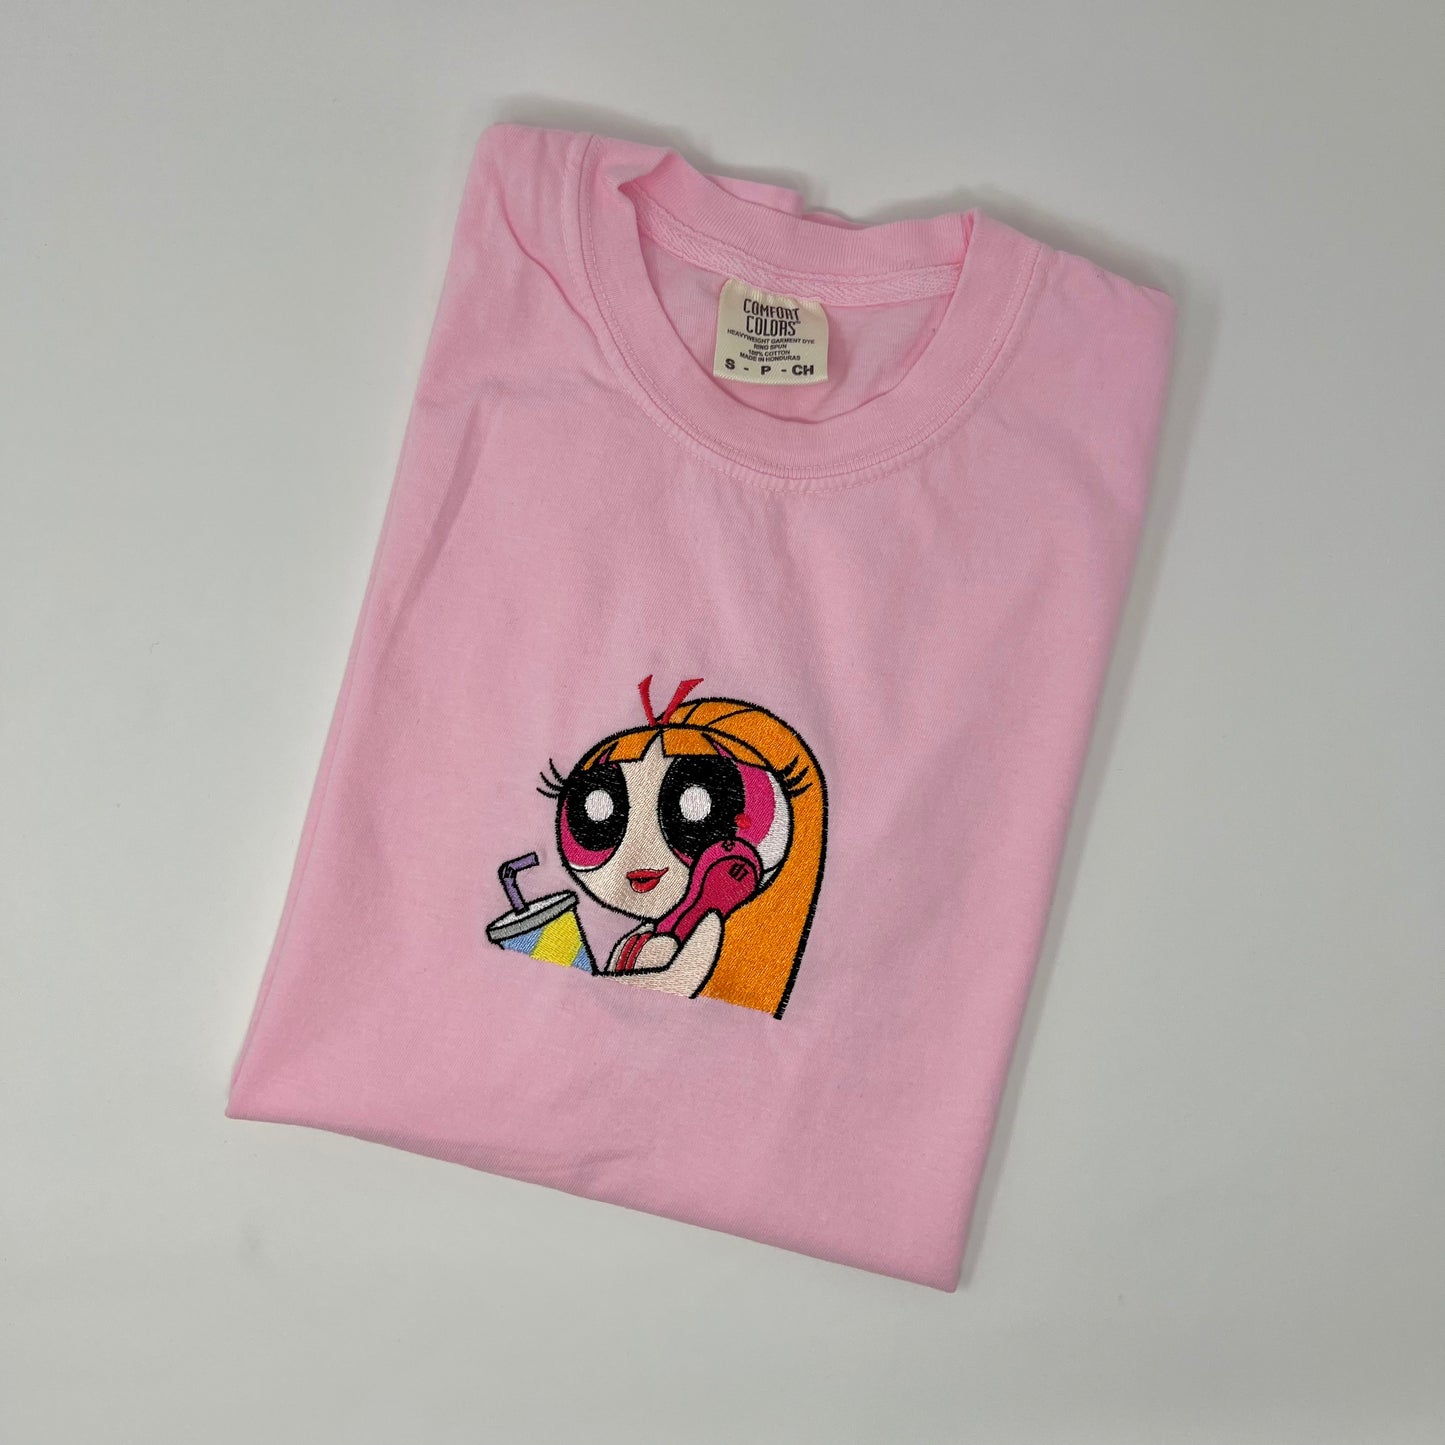 PP GIRL EMBROIDERED TSHIRT